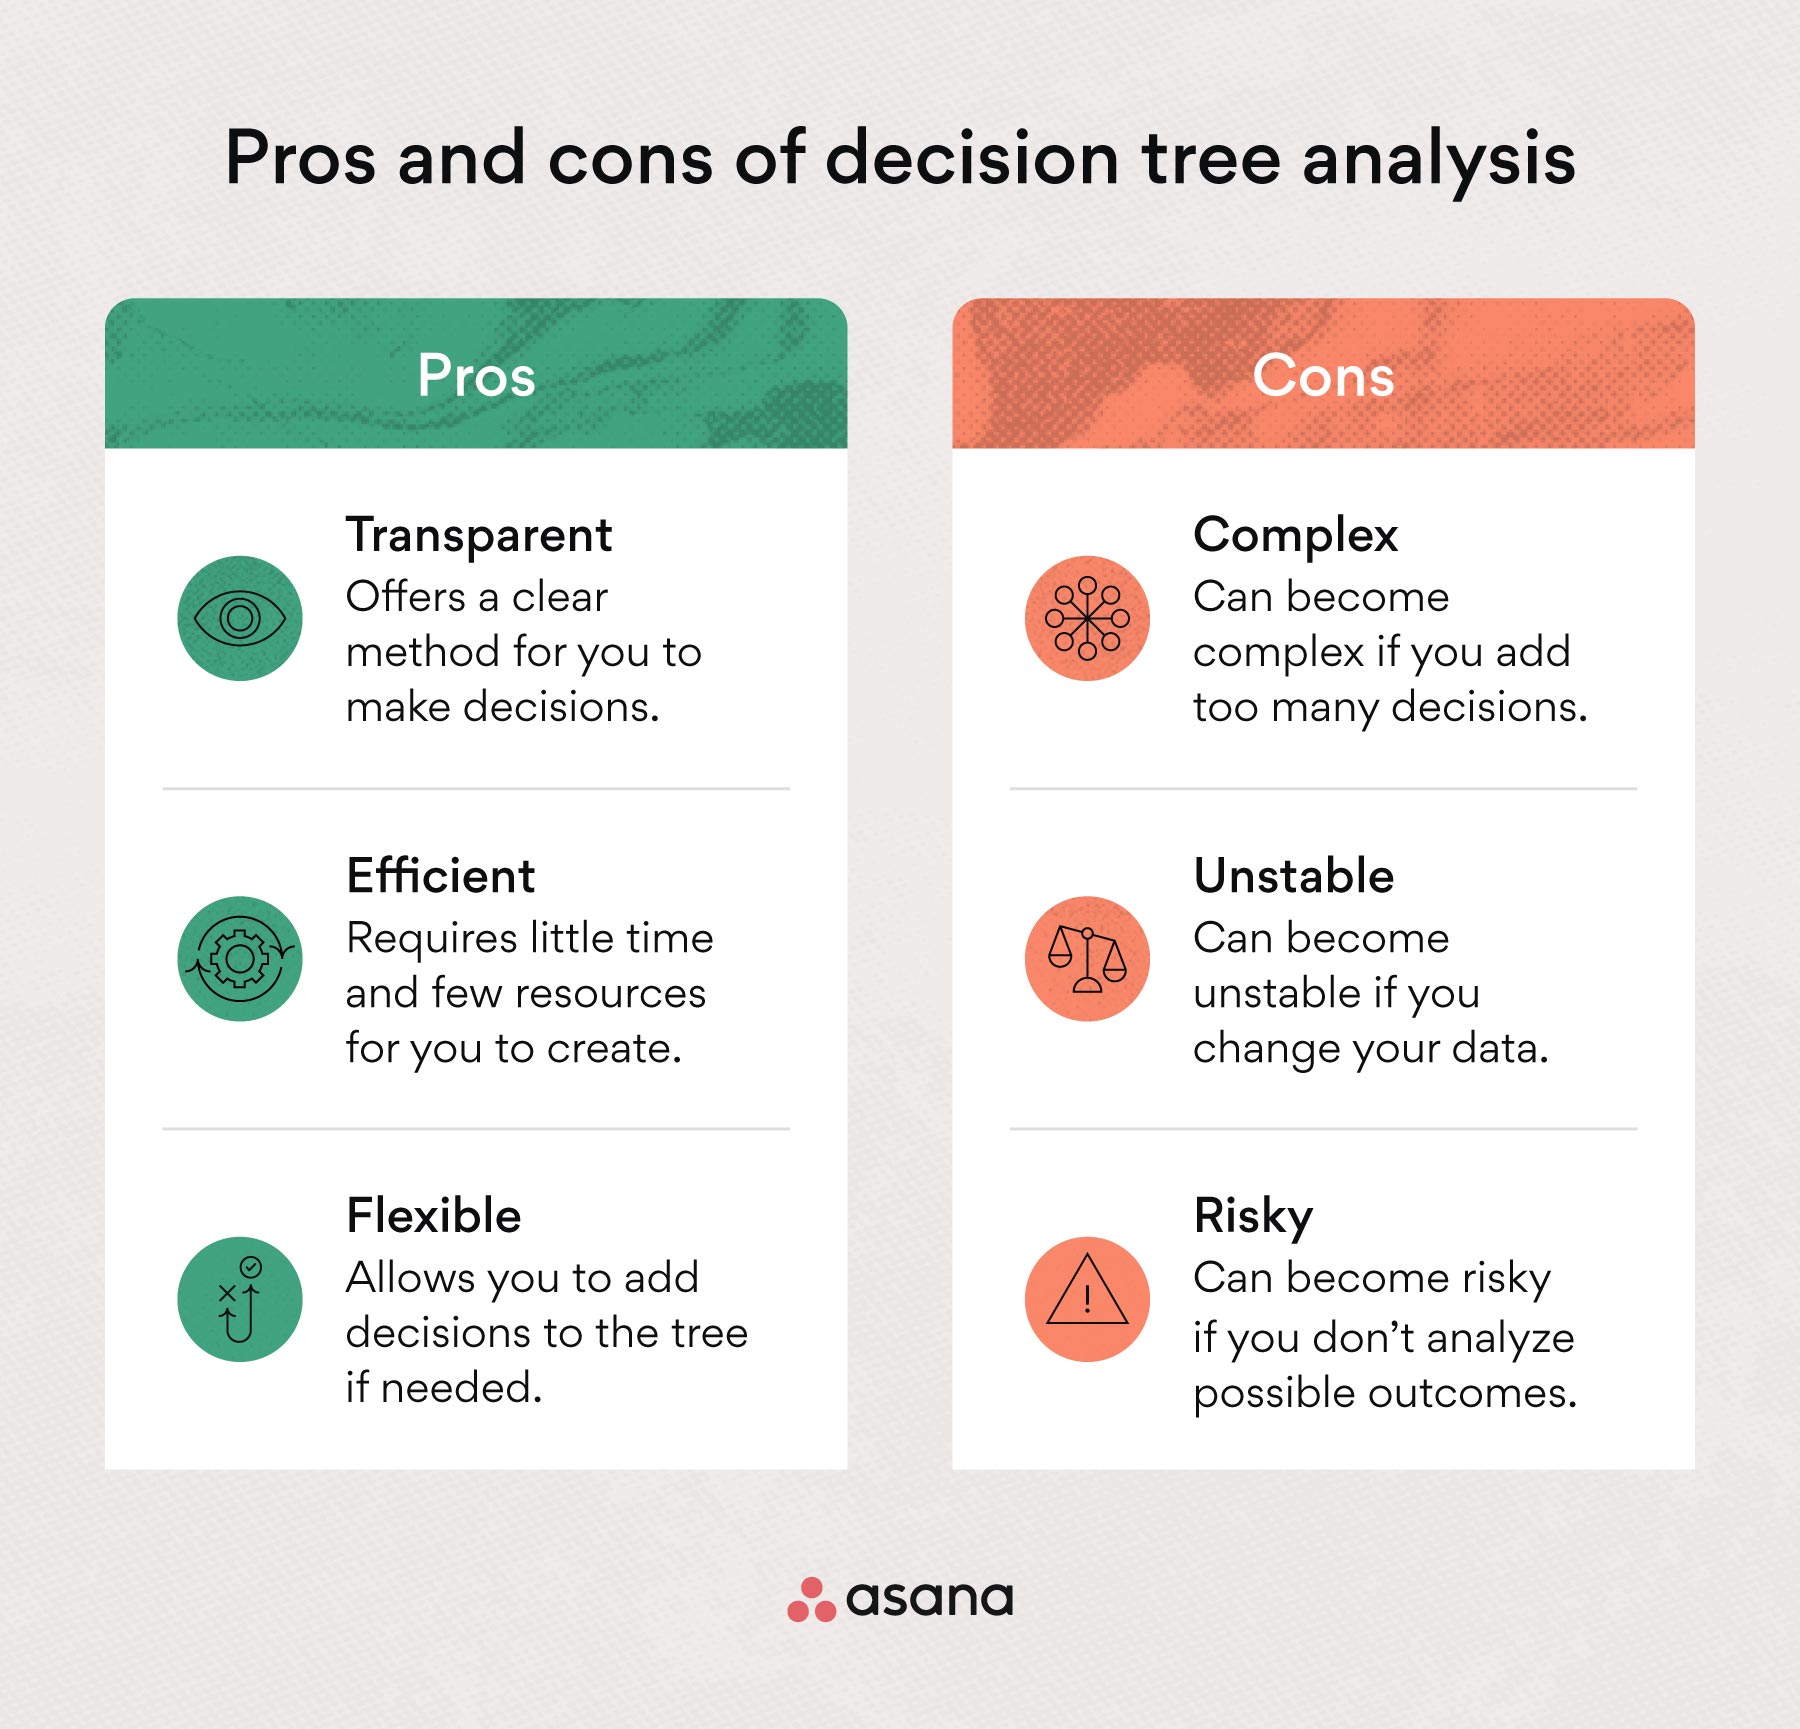 pros and cons of decision tree analysis